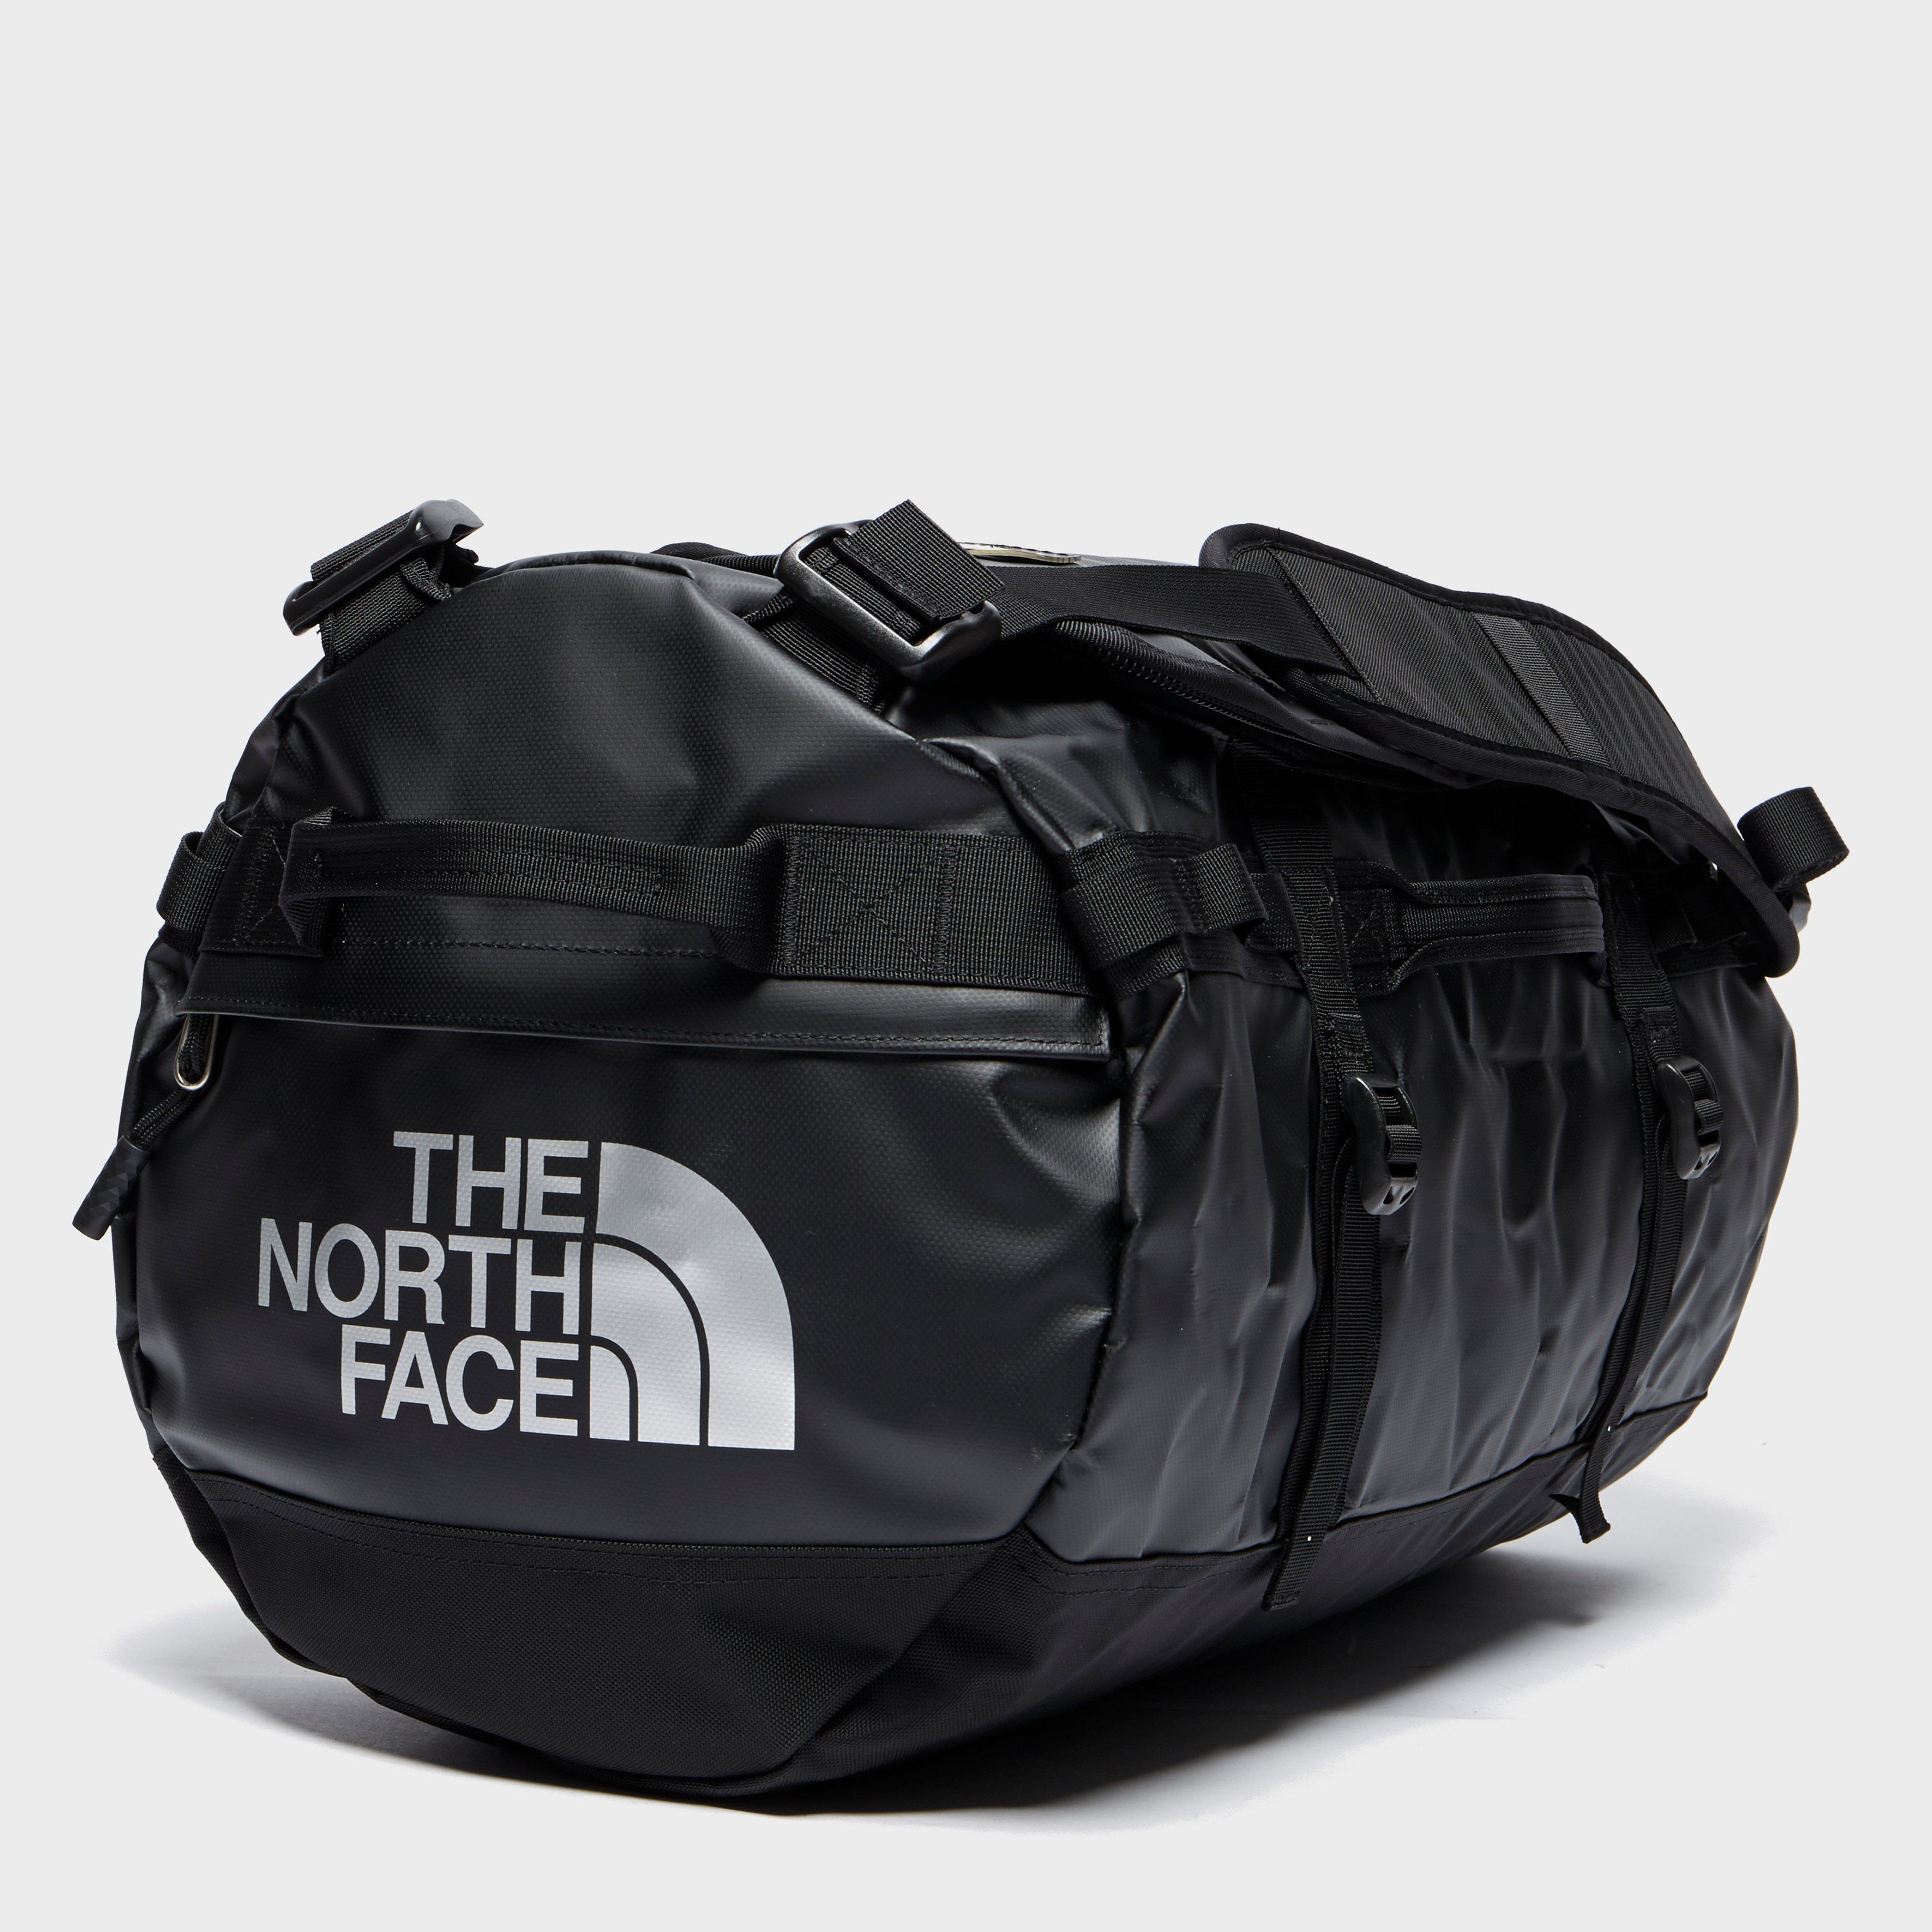 north face holdall bag